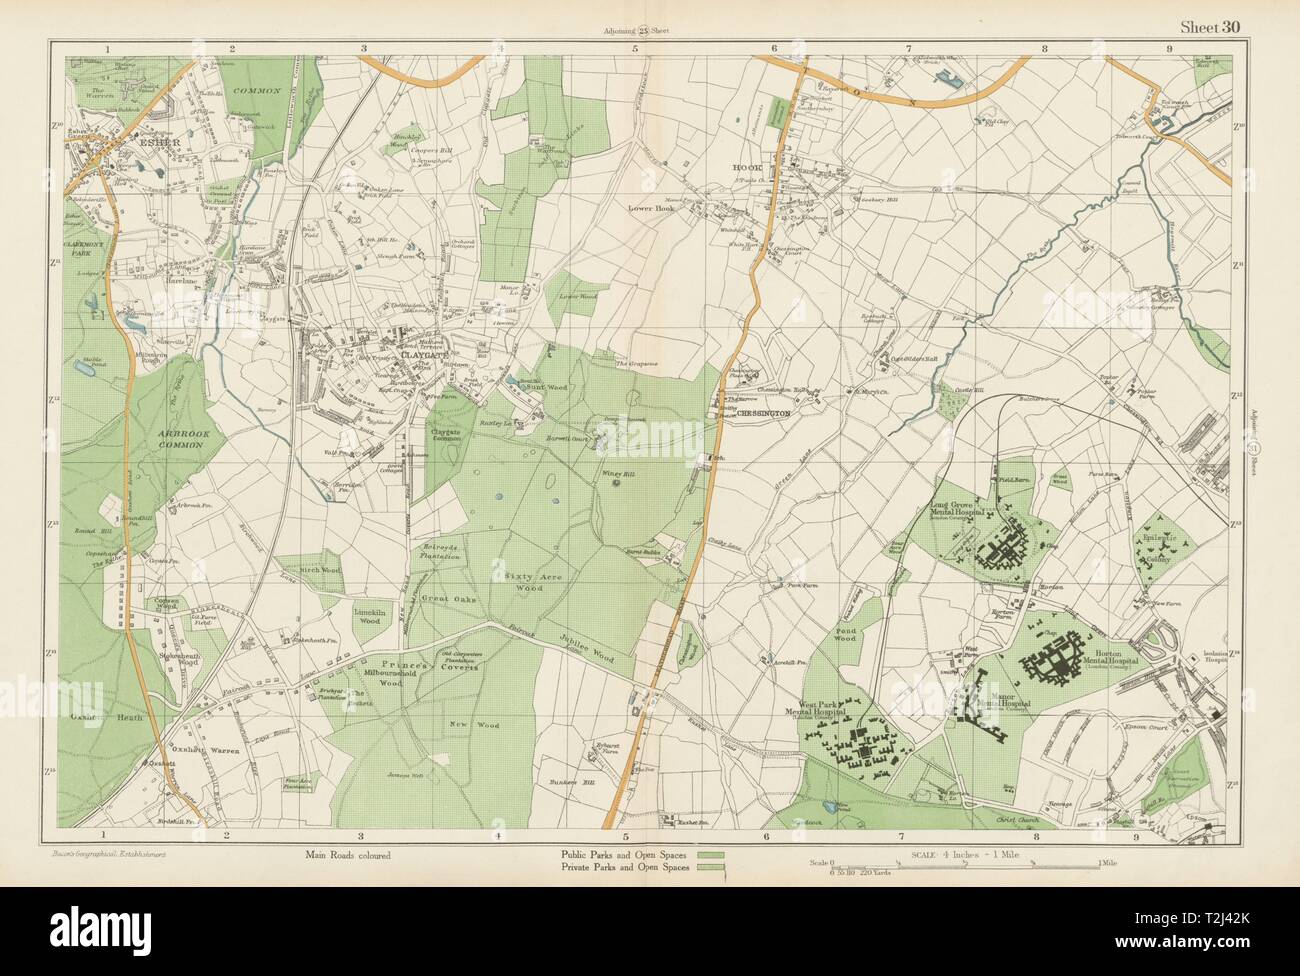 SURBITON Thames Ditton Long Ditton Giggs Hill Hinchley Wood Hook 1964 old map 